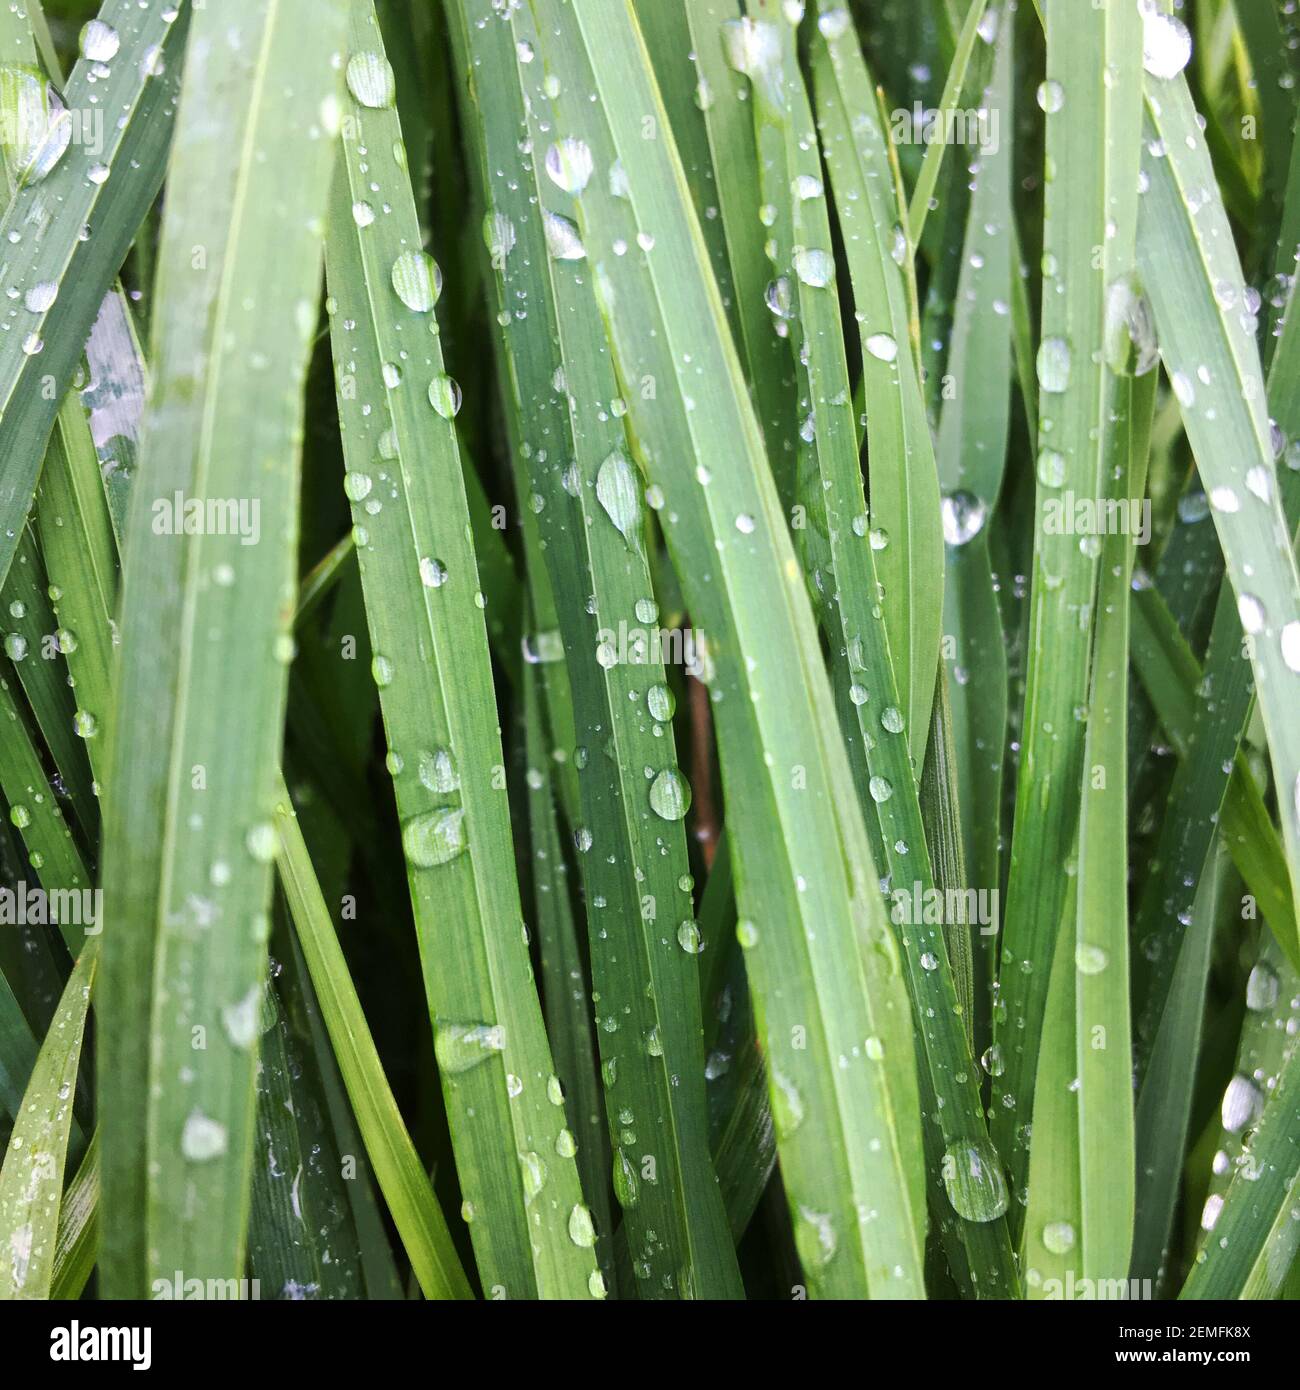 Wet wild grass leafs. Close up so you see only leafs Stock Photo